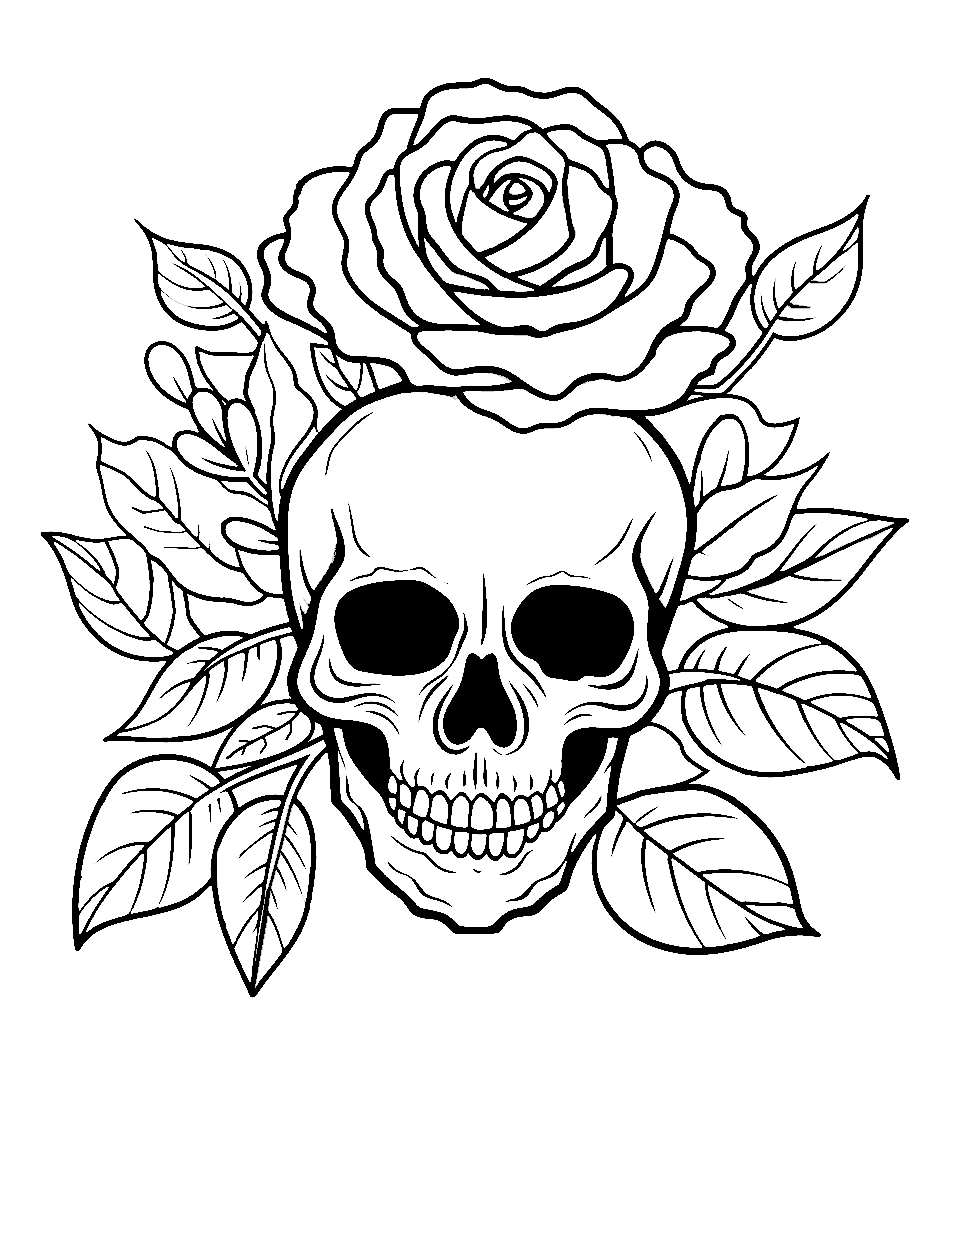 Skull Adorned with Roses Coloring Page - A peaceful skull with a solitary rose draped around it.